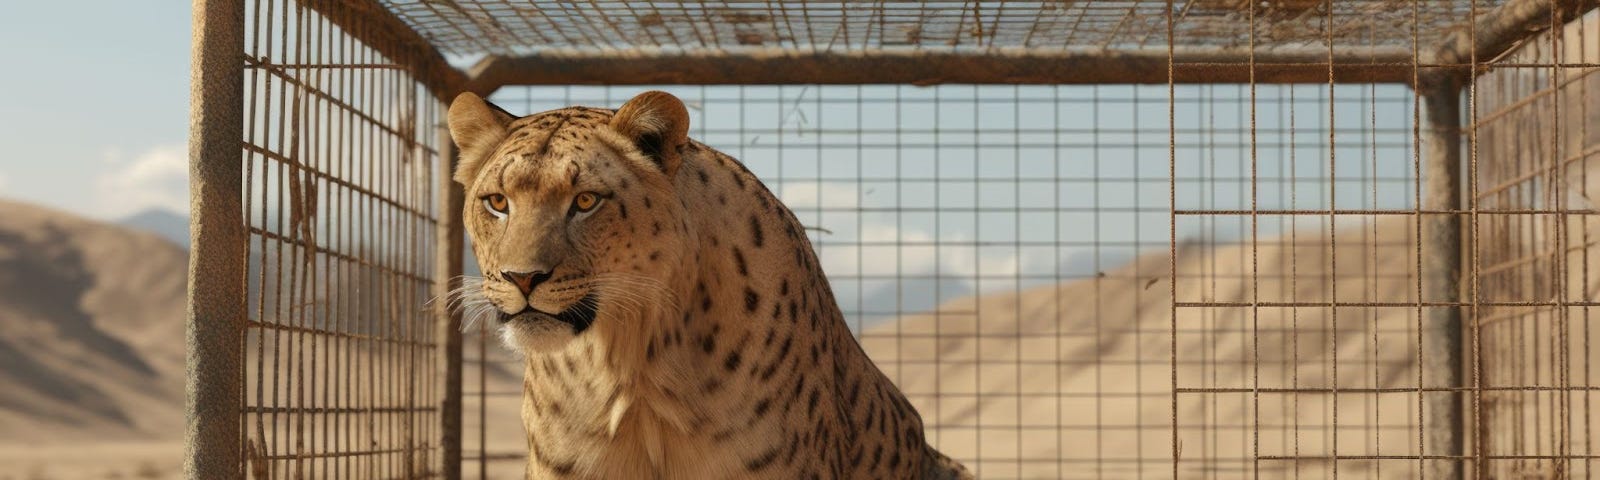 A proud cheetah sits in a cage, peering out over the serenghetti.